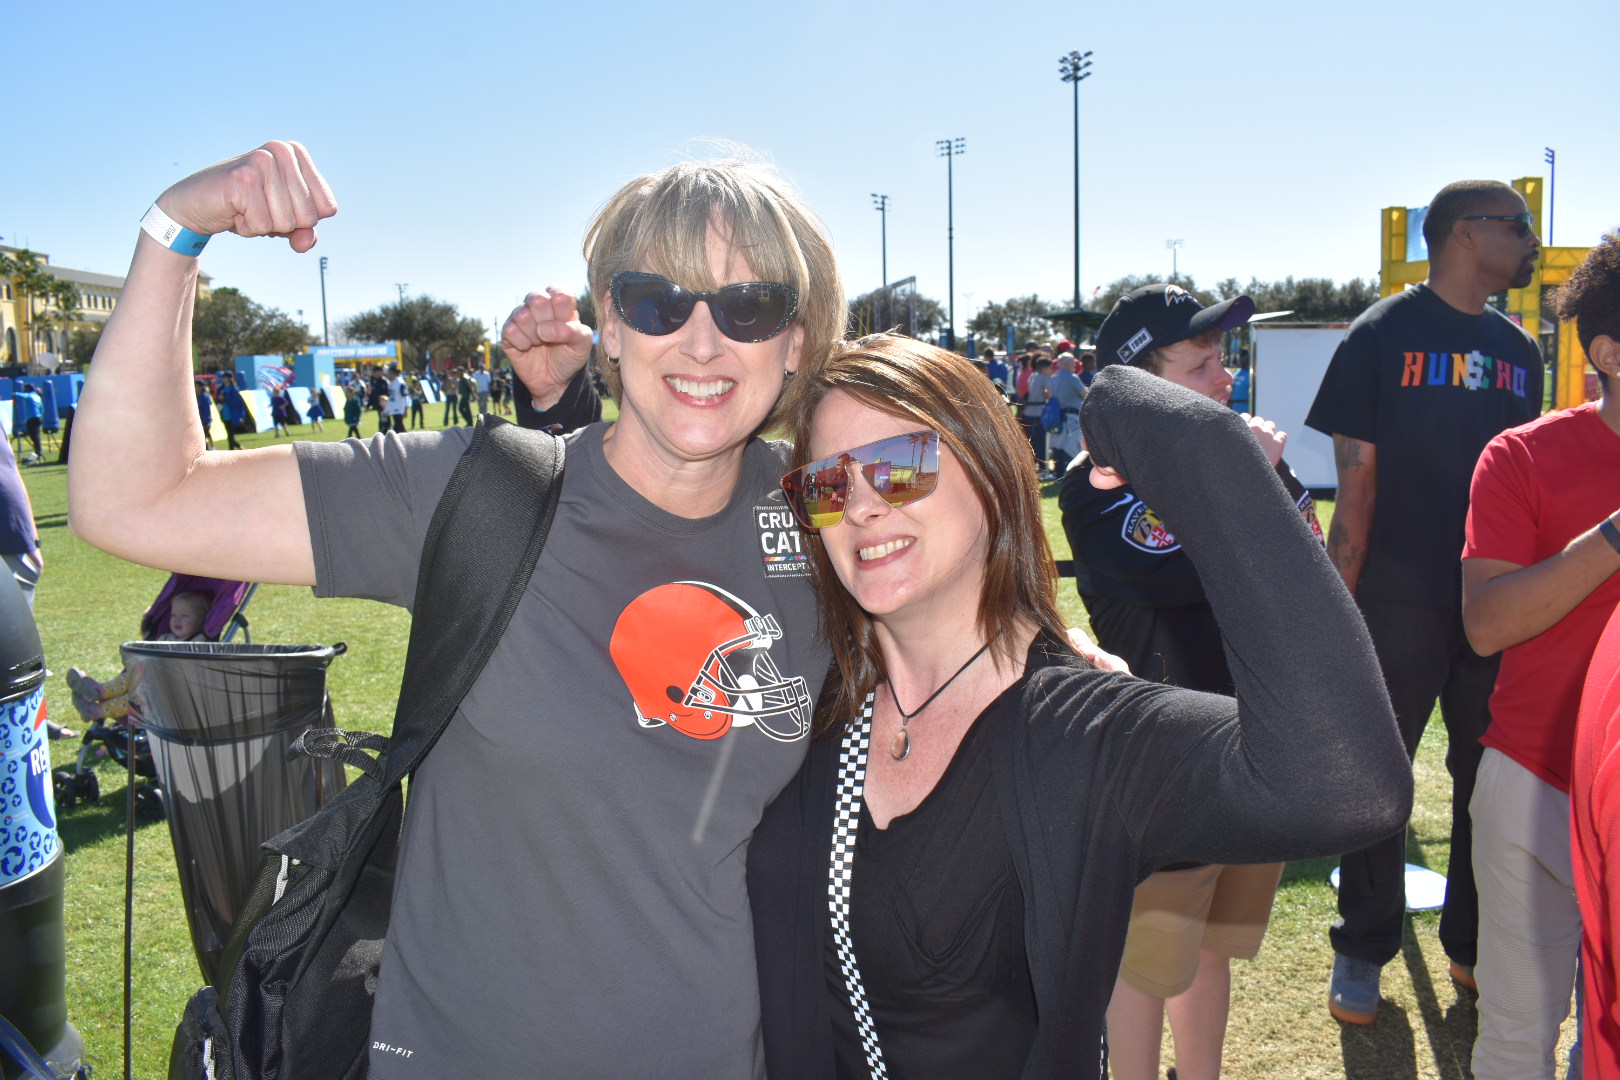 Lisa Moran represented TD and CU Cancer Center at the NFL Pro Bowl in Orlando, FL